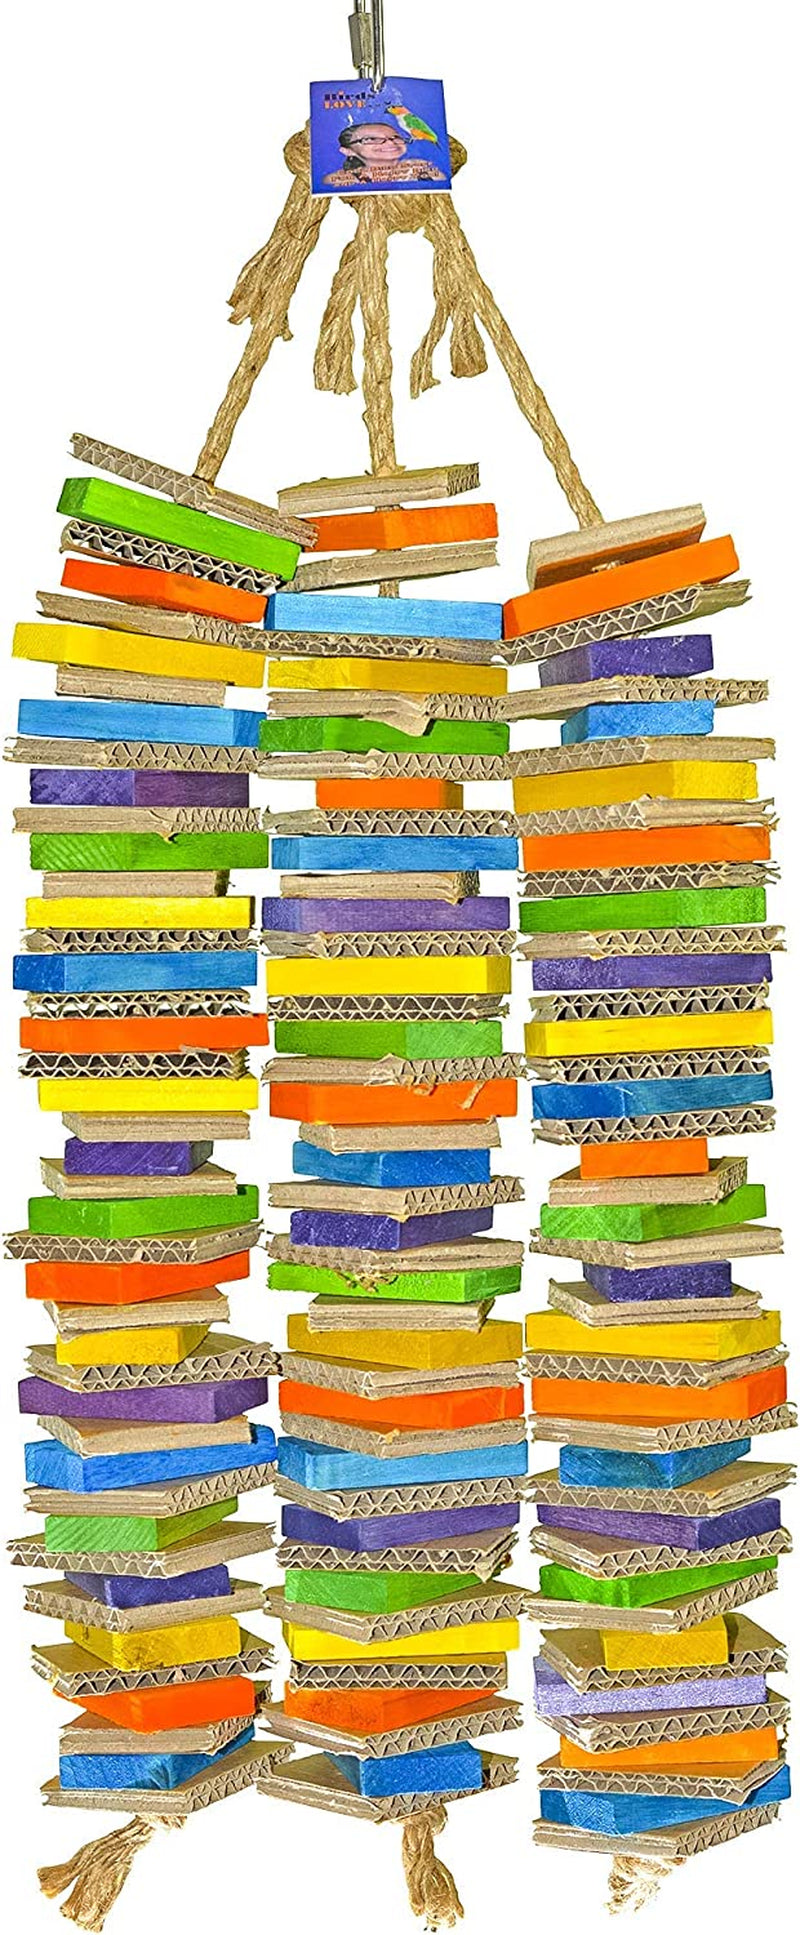 Birds LOVE Chew-Tastic Triple Tower Bird Cage Toy Shredded Fun Small Bird Toy for Green Cheek Conures Sun Conures Caiques Senegals Quakers and Similar Small Sized Parrots